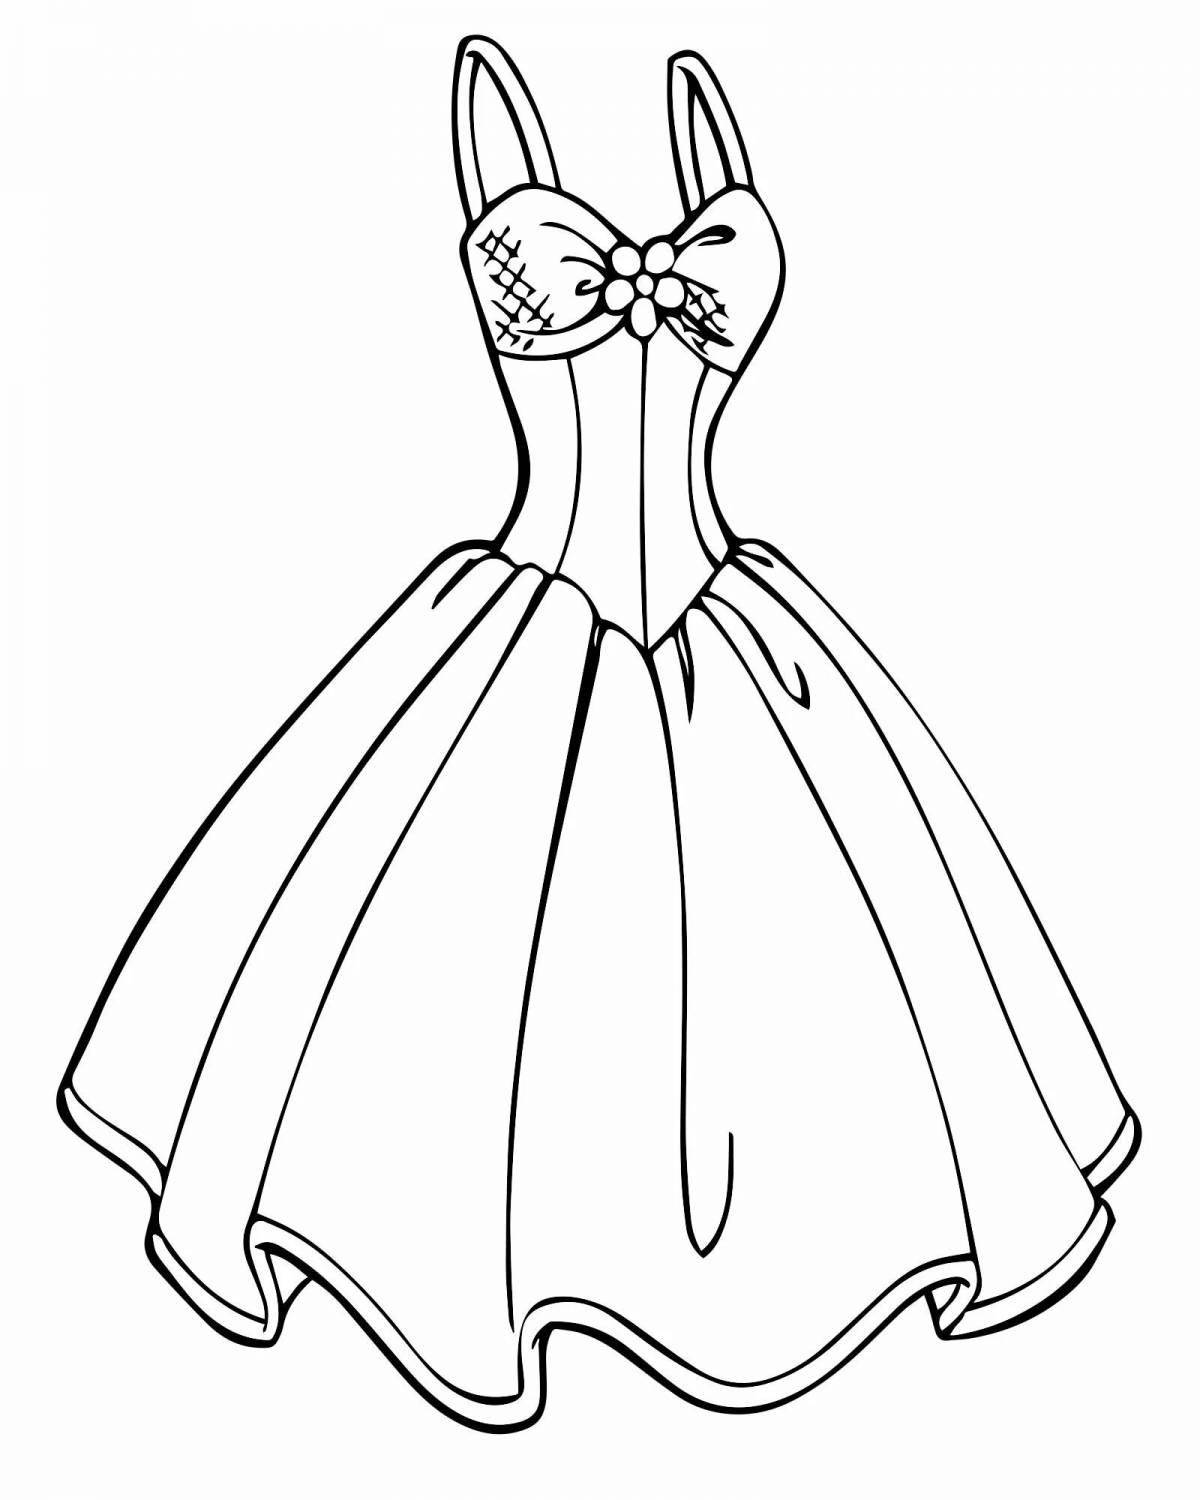 Exquisite ball gown coloring book